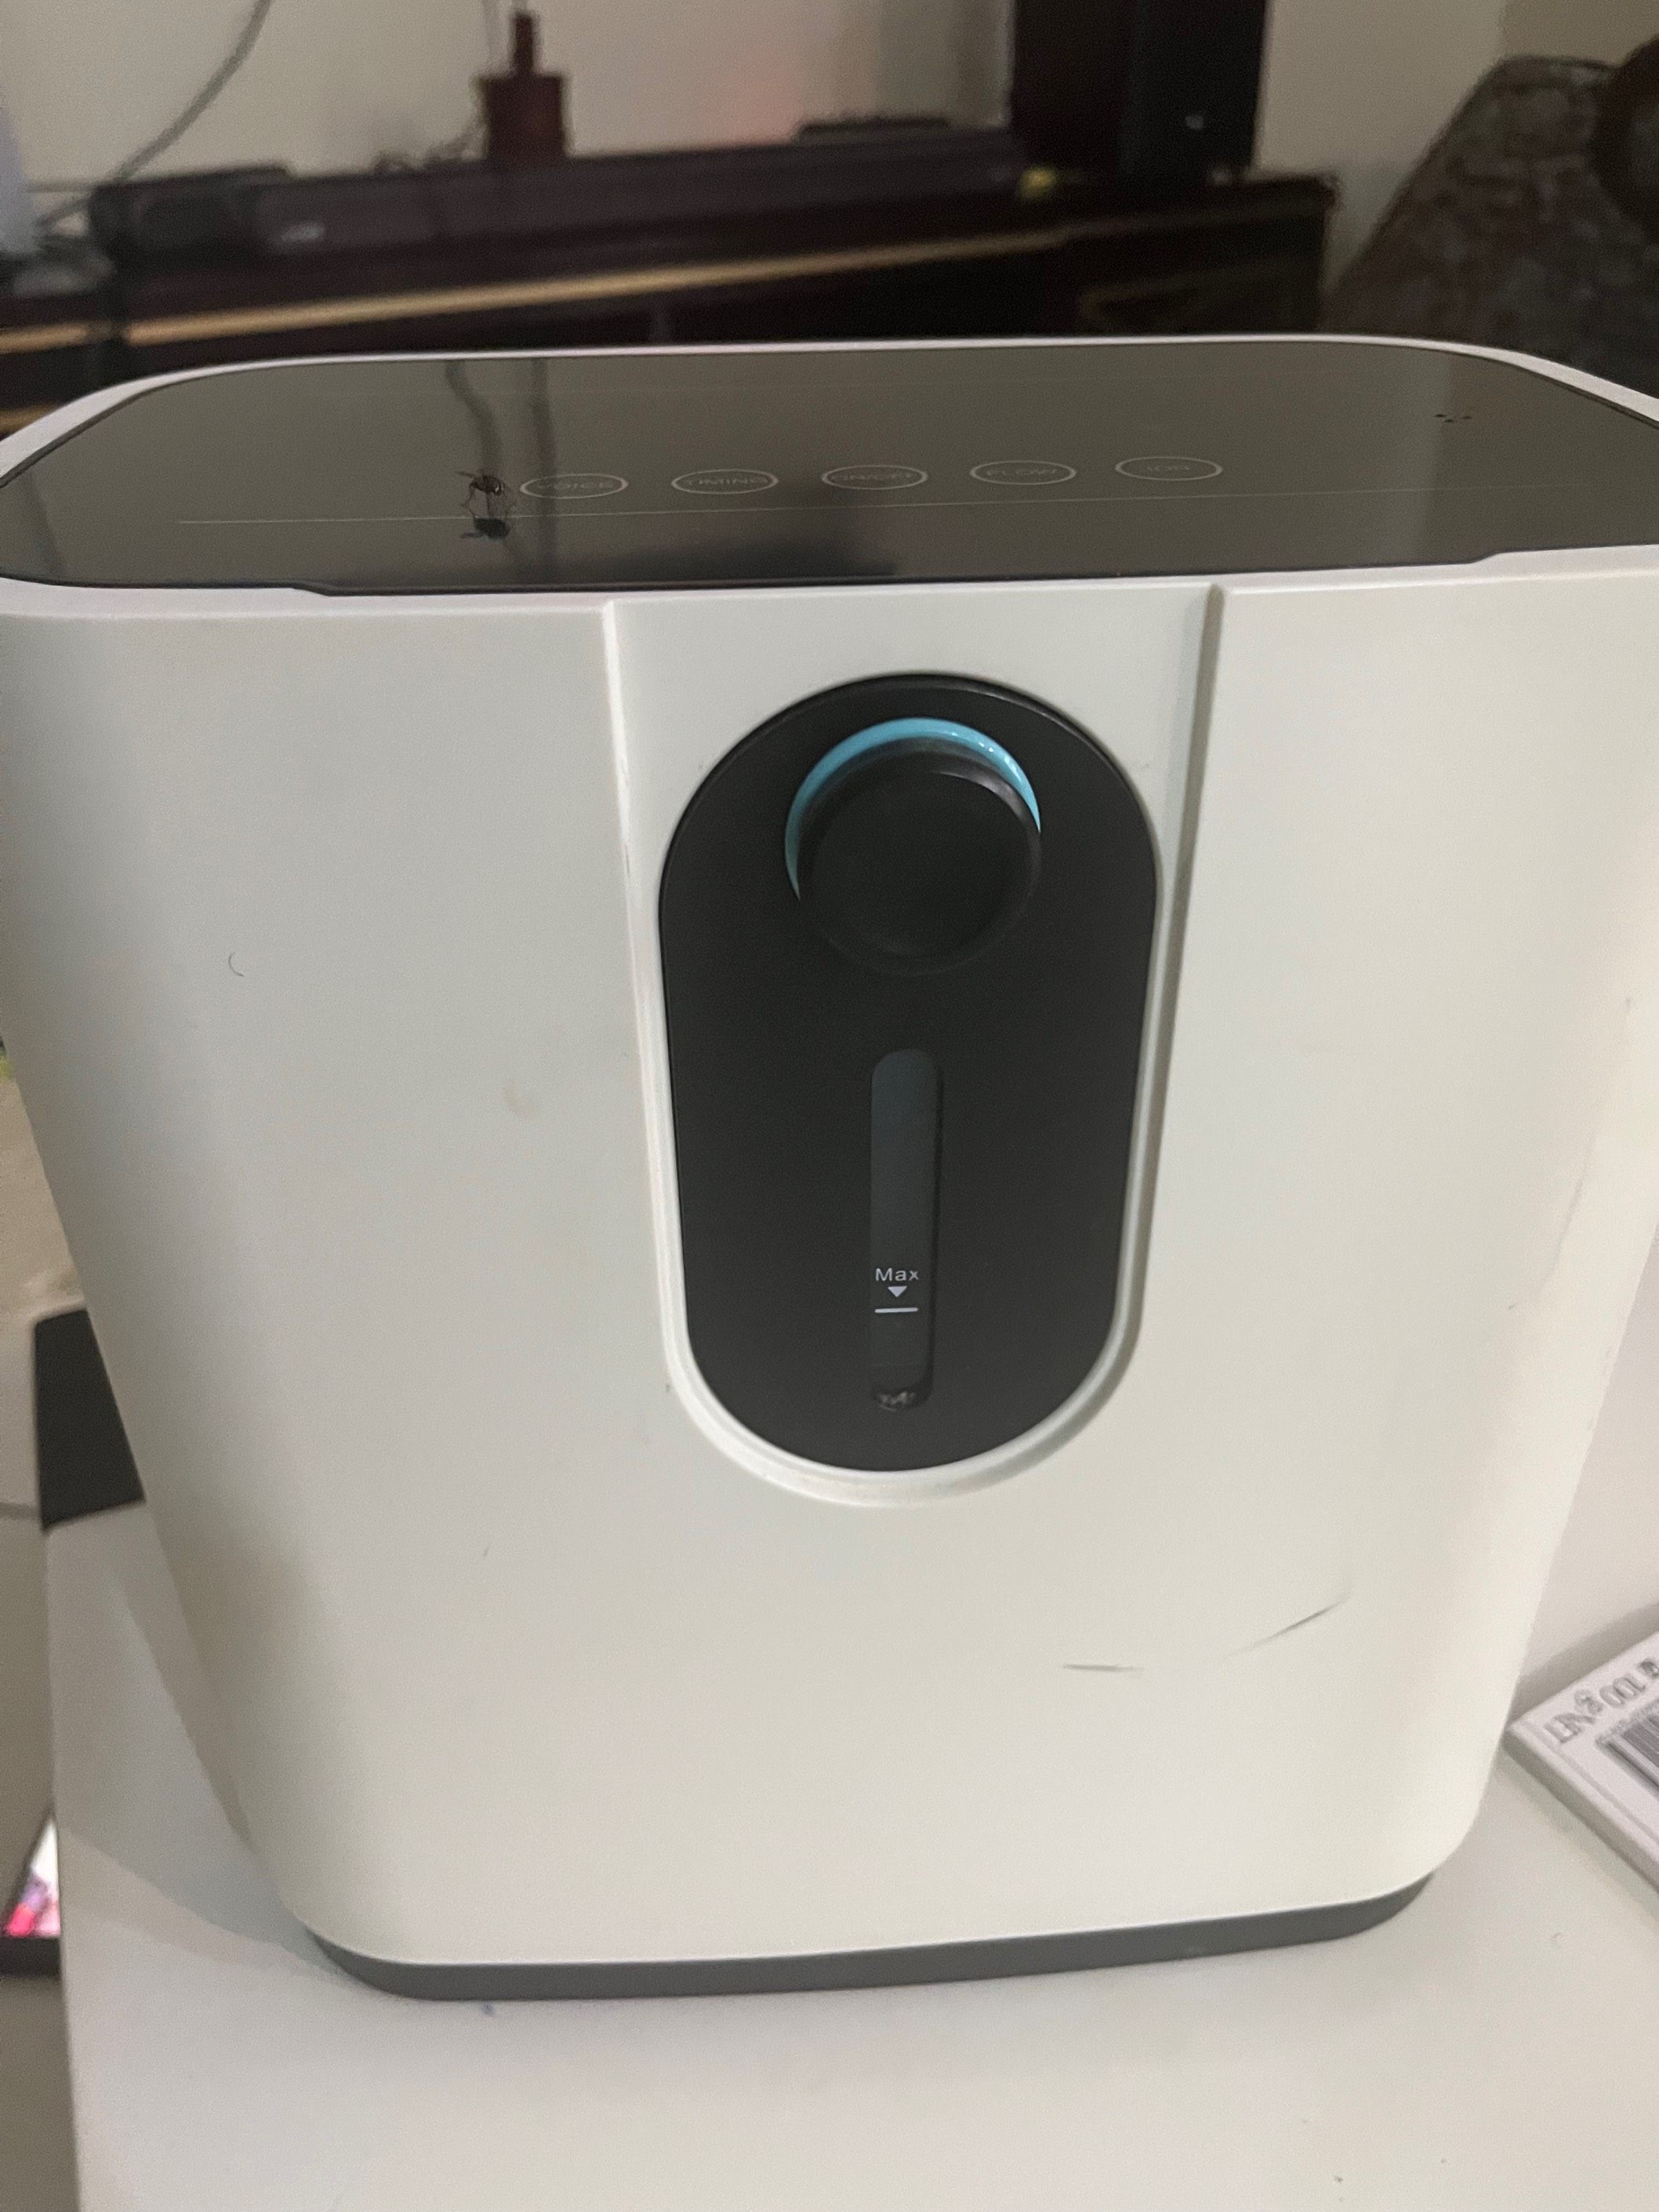 Oxygen Concentrator Fairly Used